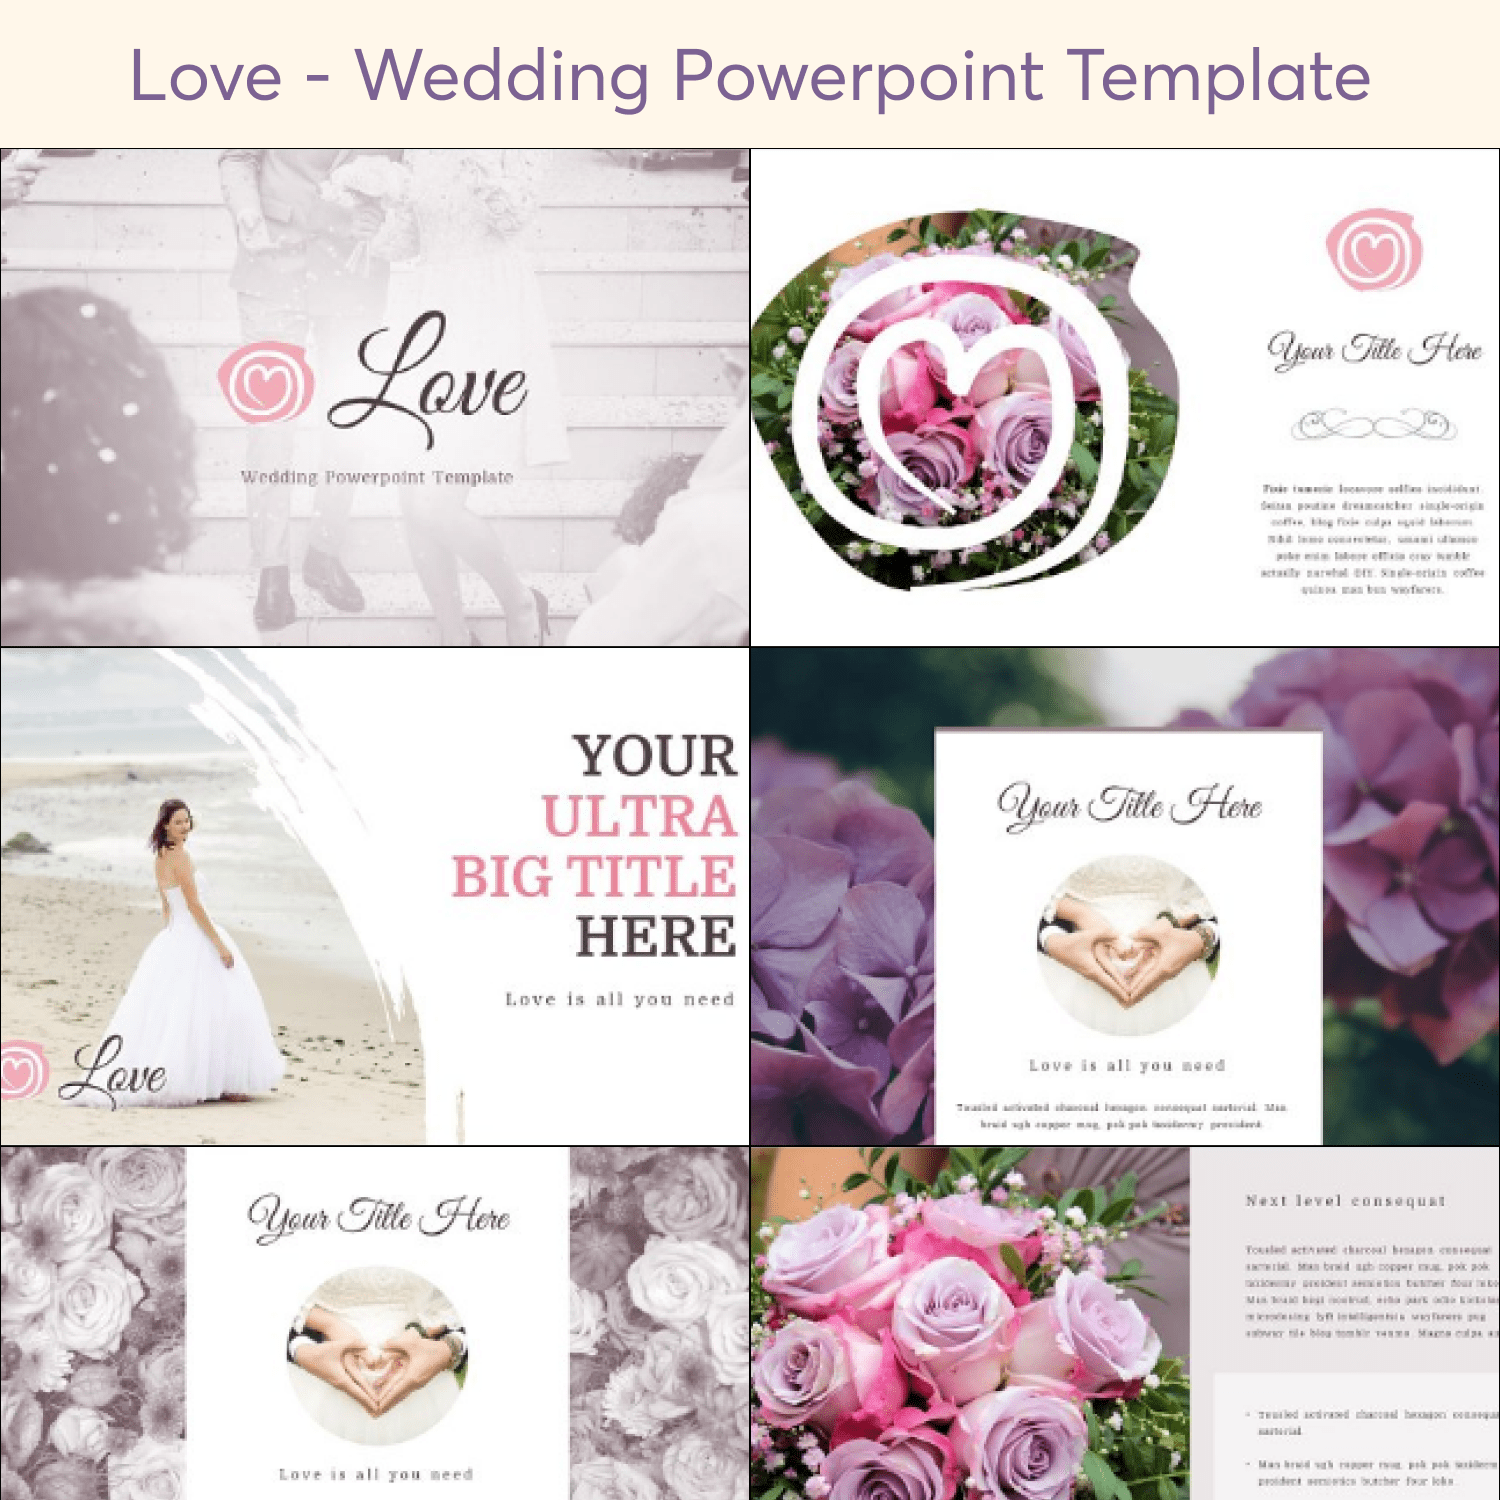 Love - Wedding Powerpoint Template cover image.